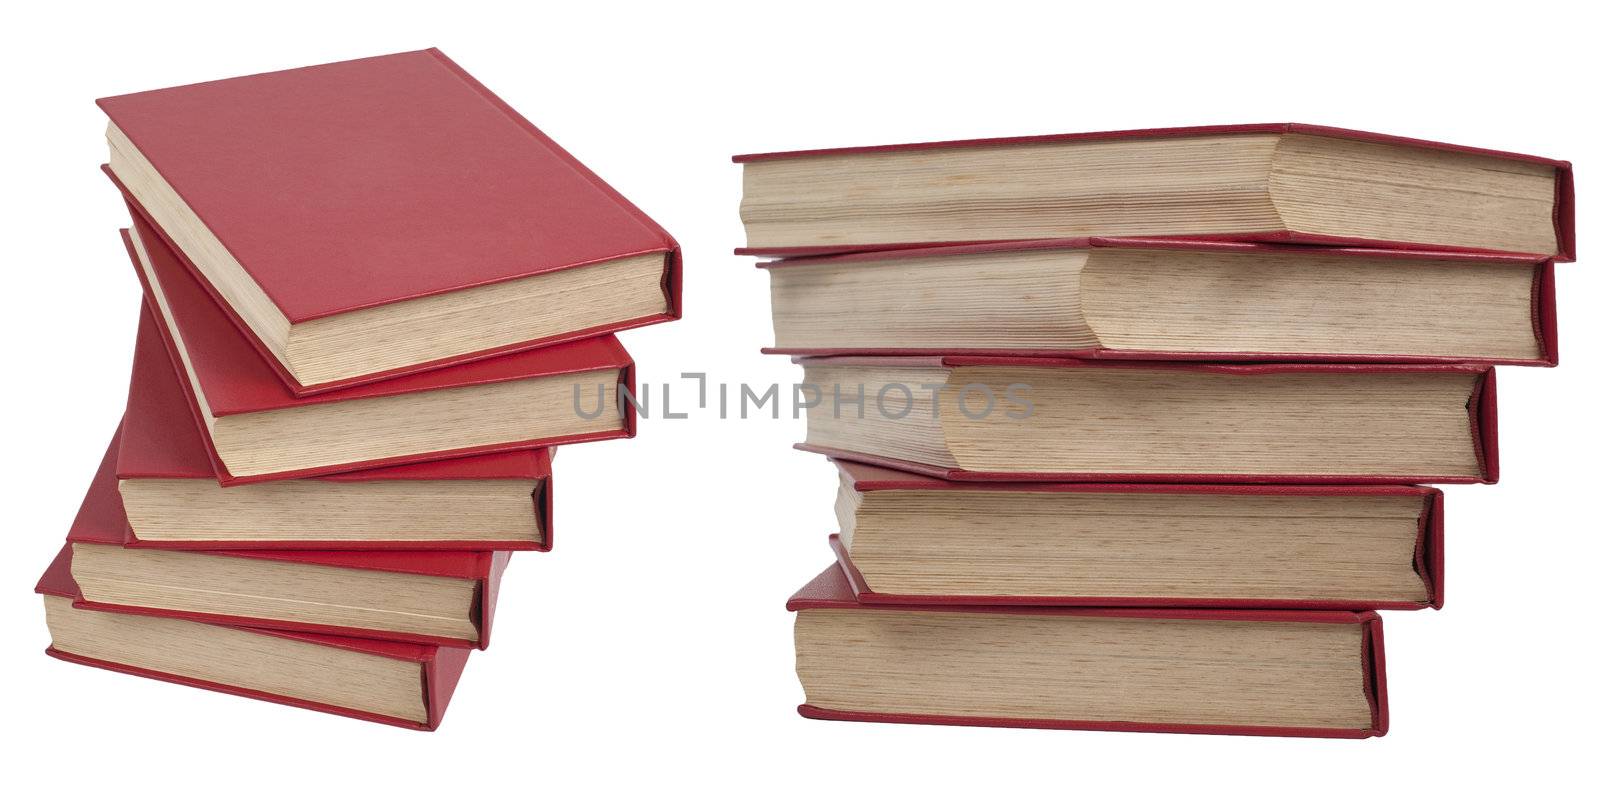 Two piles of red books isolated on white background.